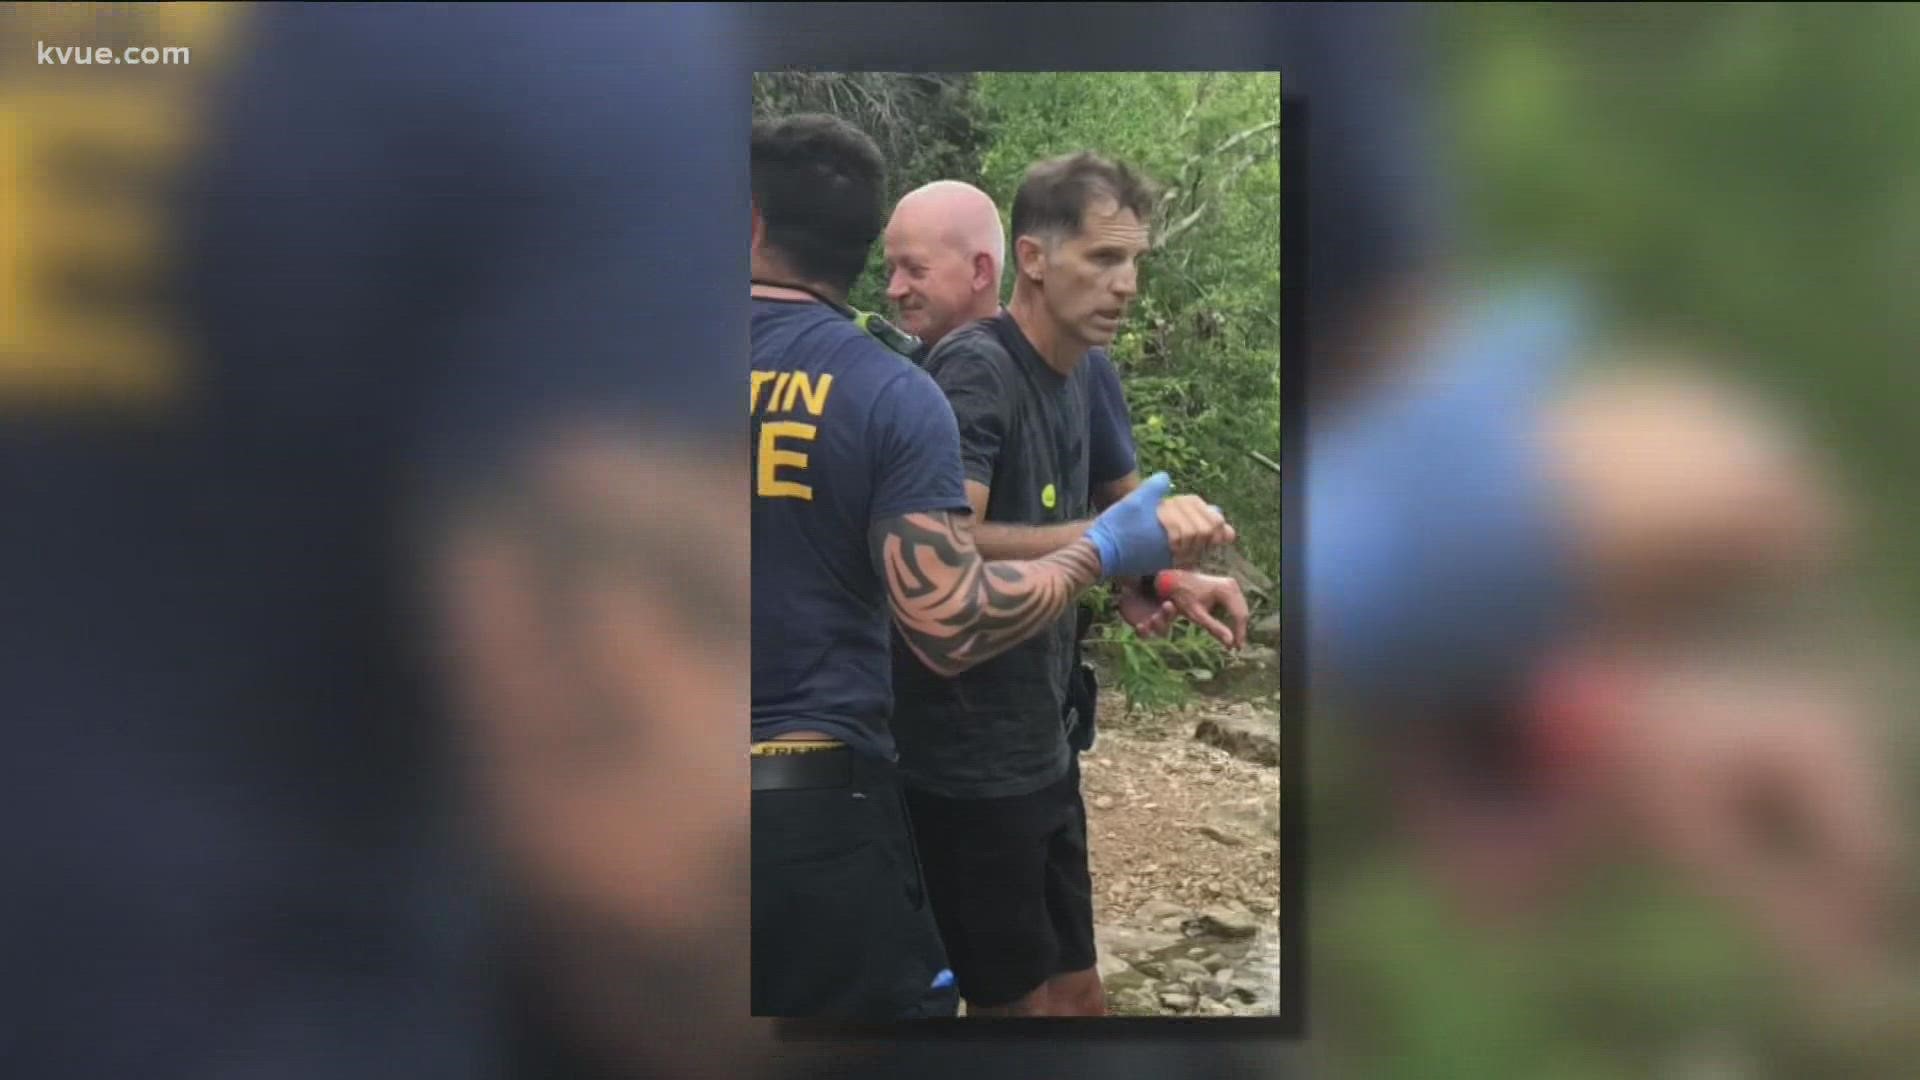 A hiker is still recovering after his encounter with a copperhead snake in Austin's St. Edwards Park. Now he's warning others.